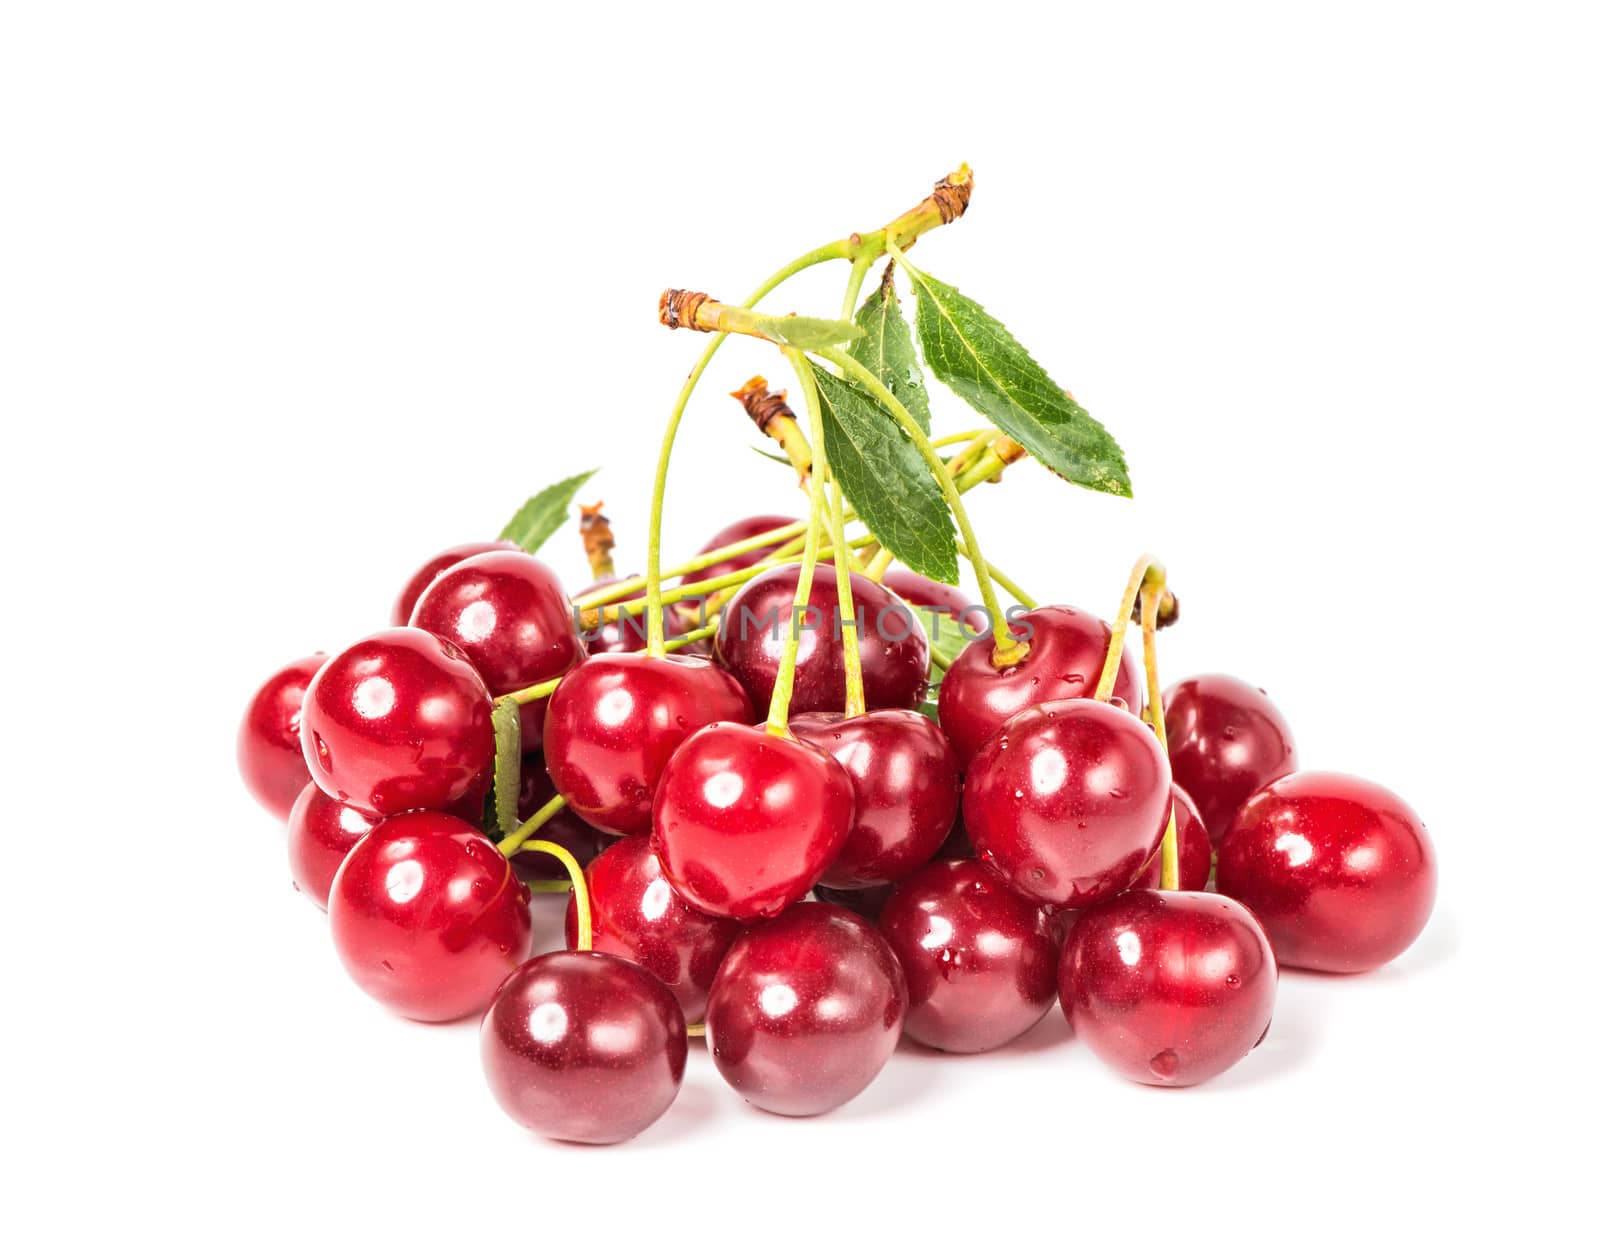 Sweet juicy cherry on white background by Draw05